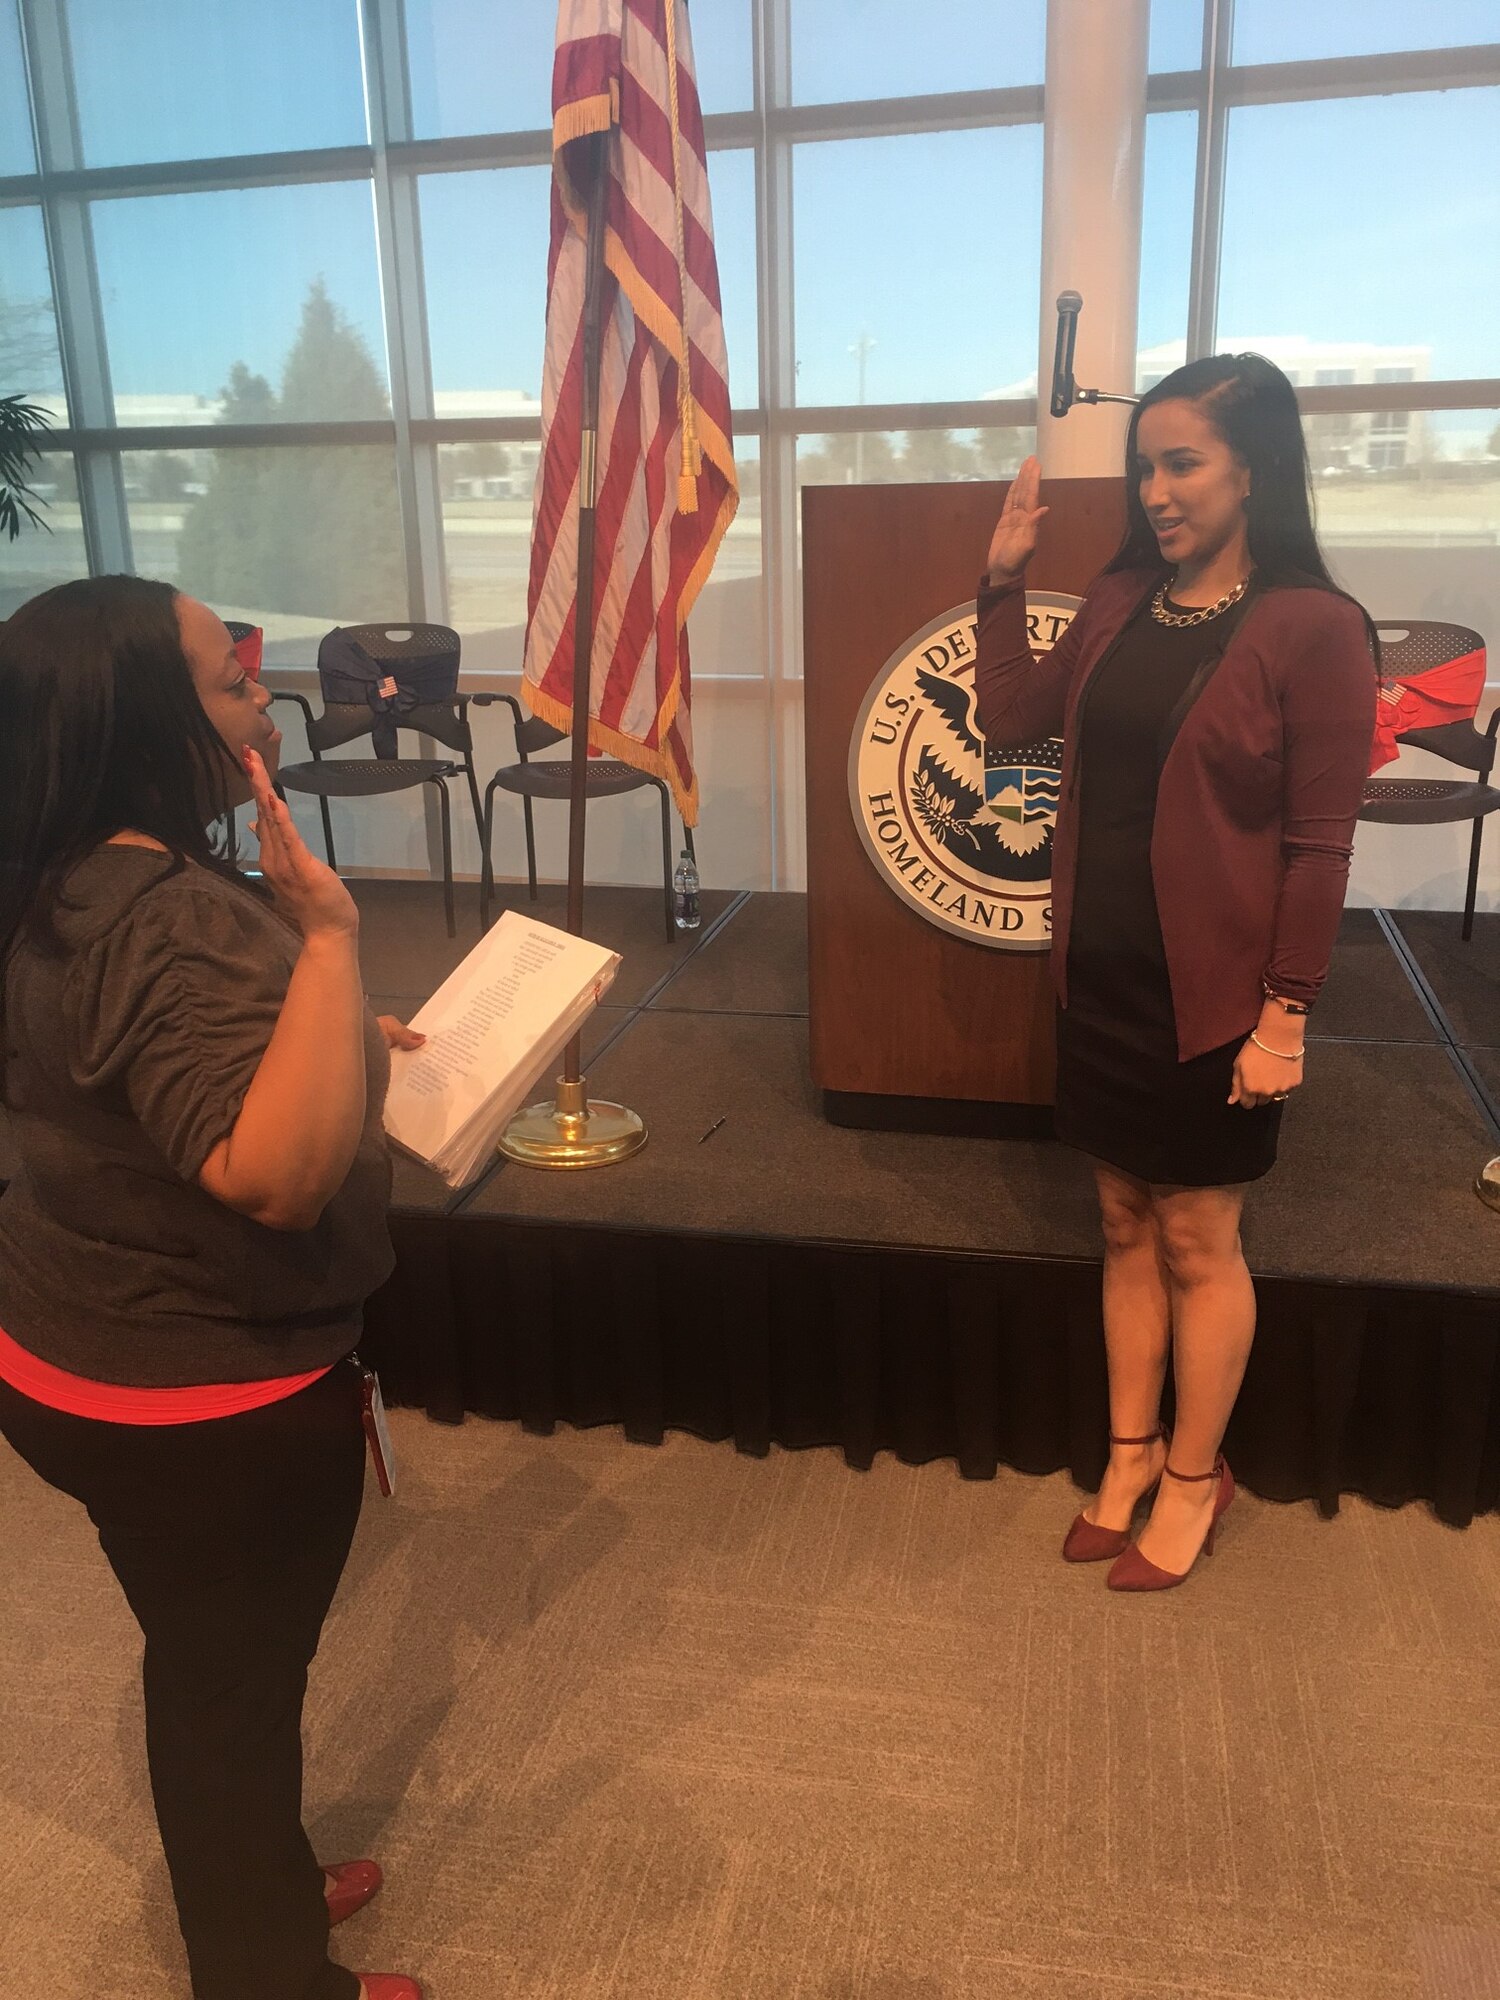 U.S. Air Force Airman 1st Class Alicia “Alice” Contreras, right, 7th Bomb Wing paralegal, recites the oath of citizenship at the department of citizenship and immigration services in Dallas, Texas, Feb. 7, 2017. After almost two years since joining the U.S. Air Force, Contreras was finally able to achieve one of her biggest goals: obtaining American citizenship. (Courtesy photo)